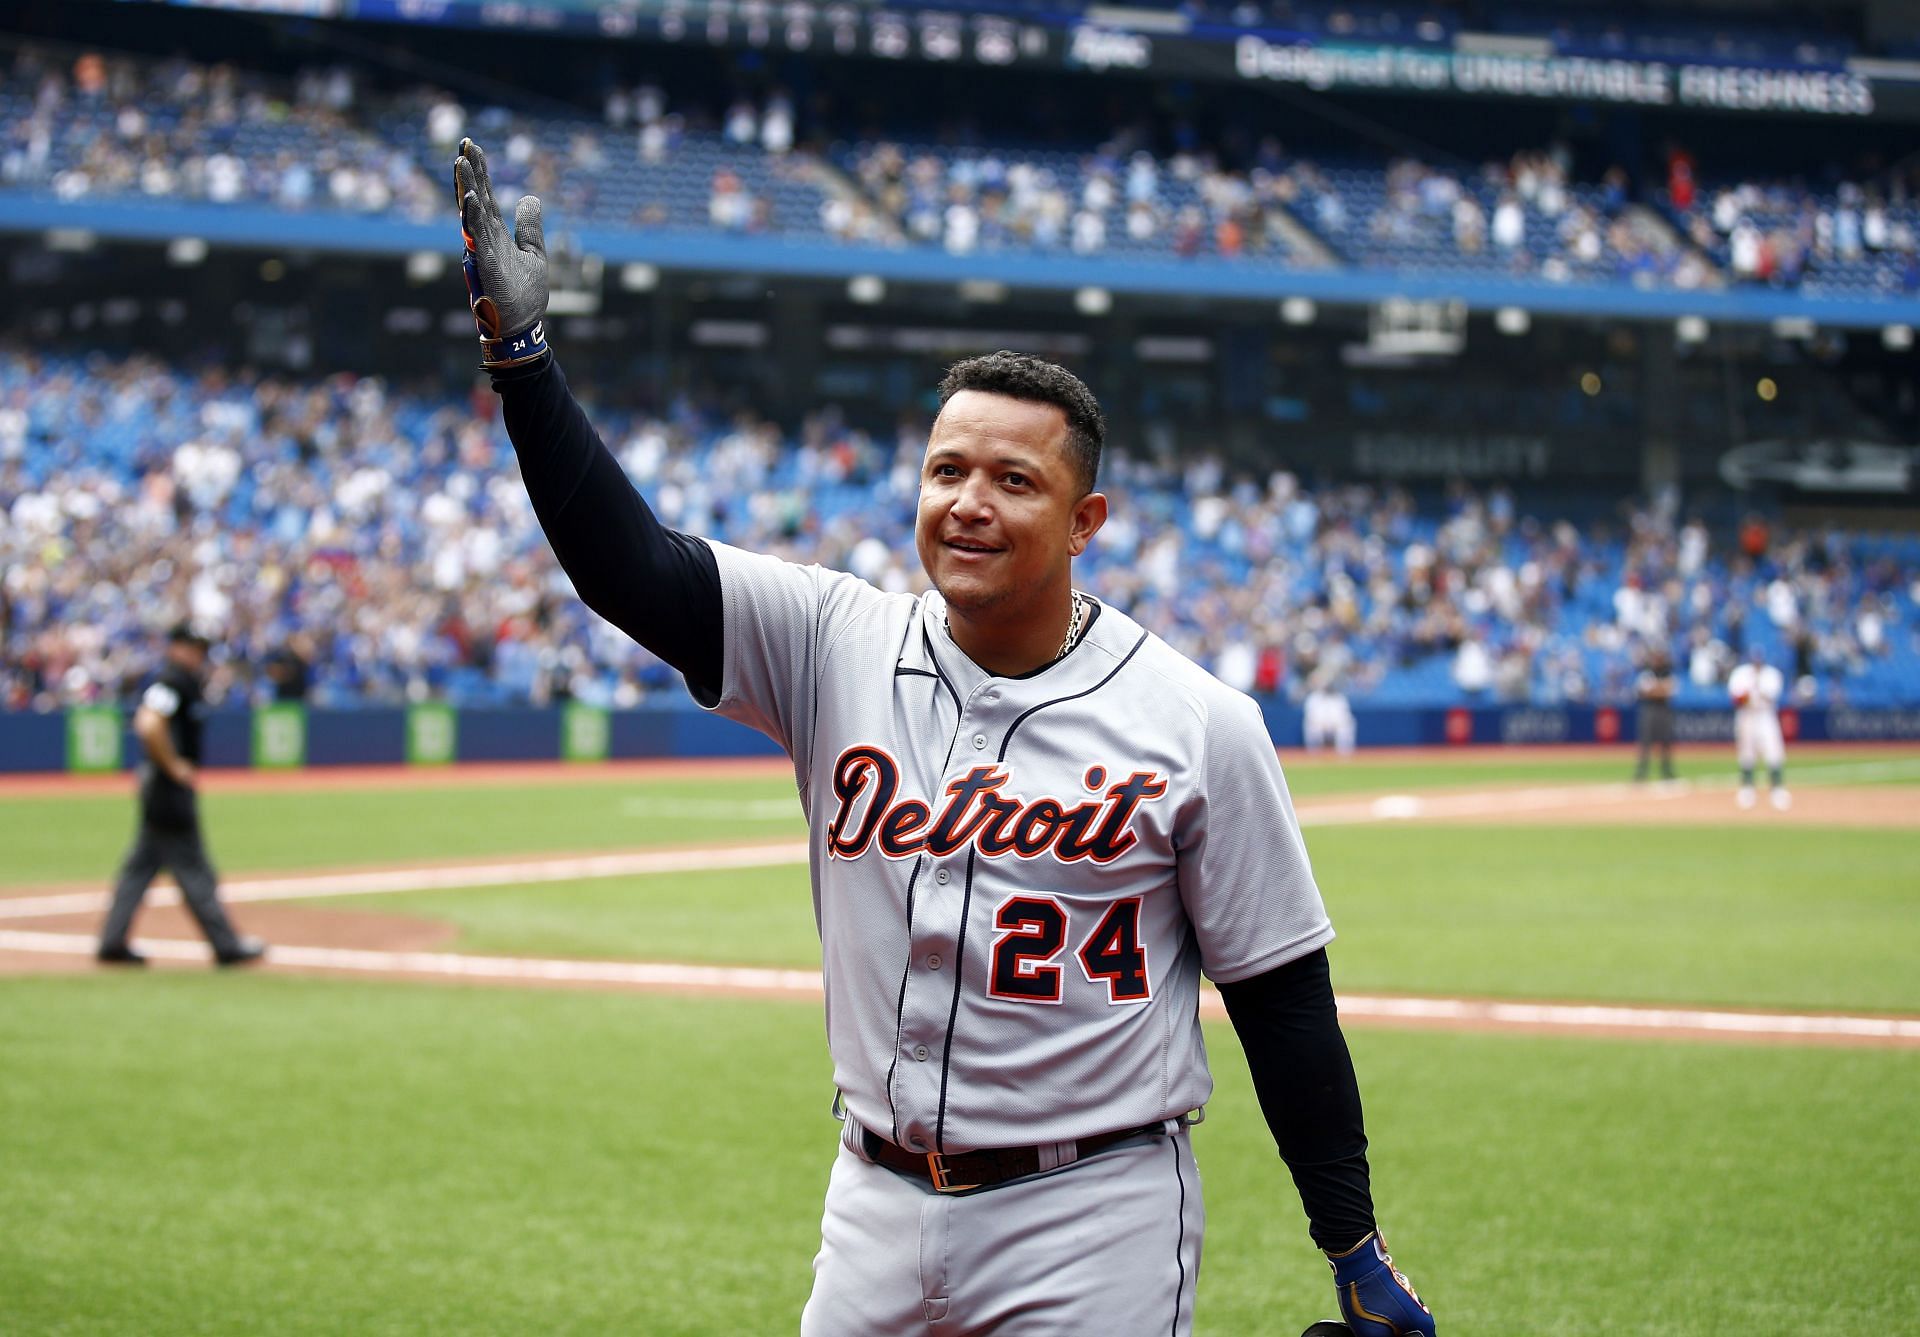 Cabrera celebrates after hitting his 500th career home run